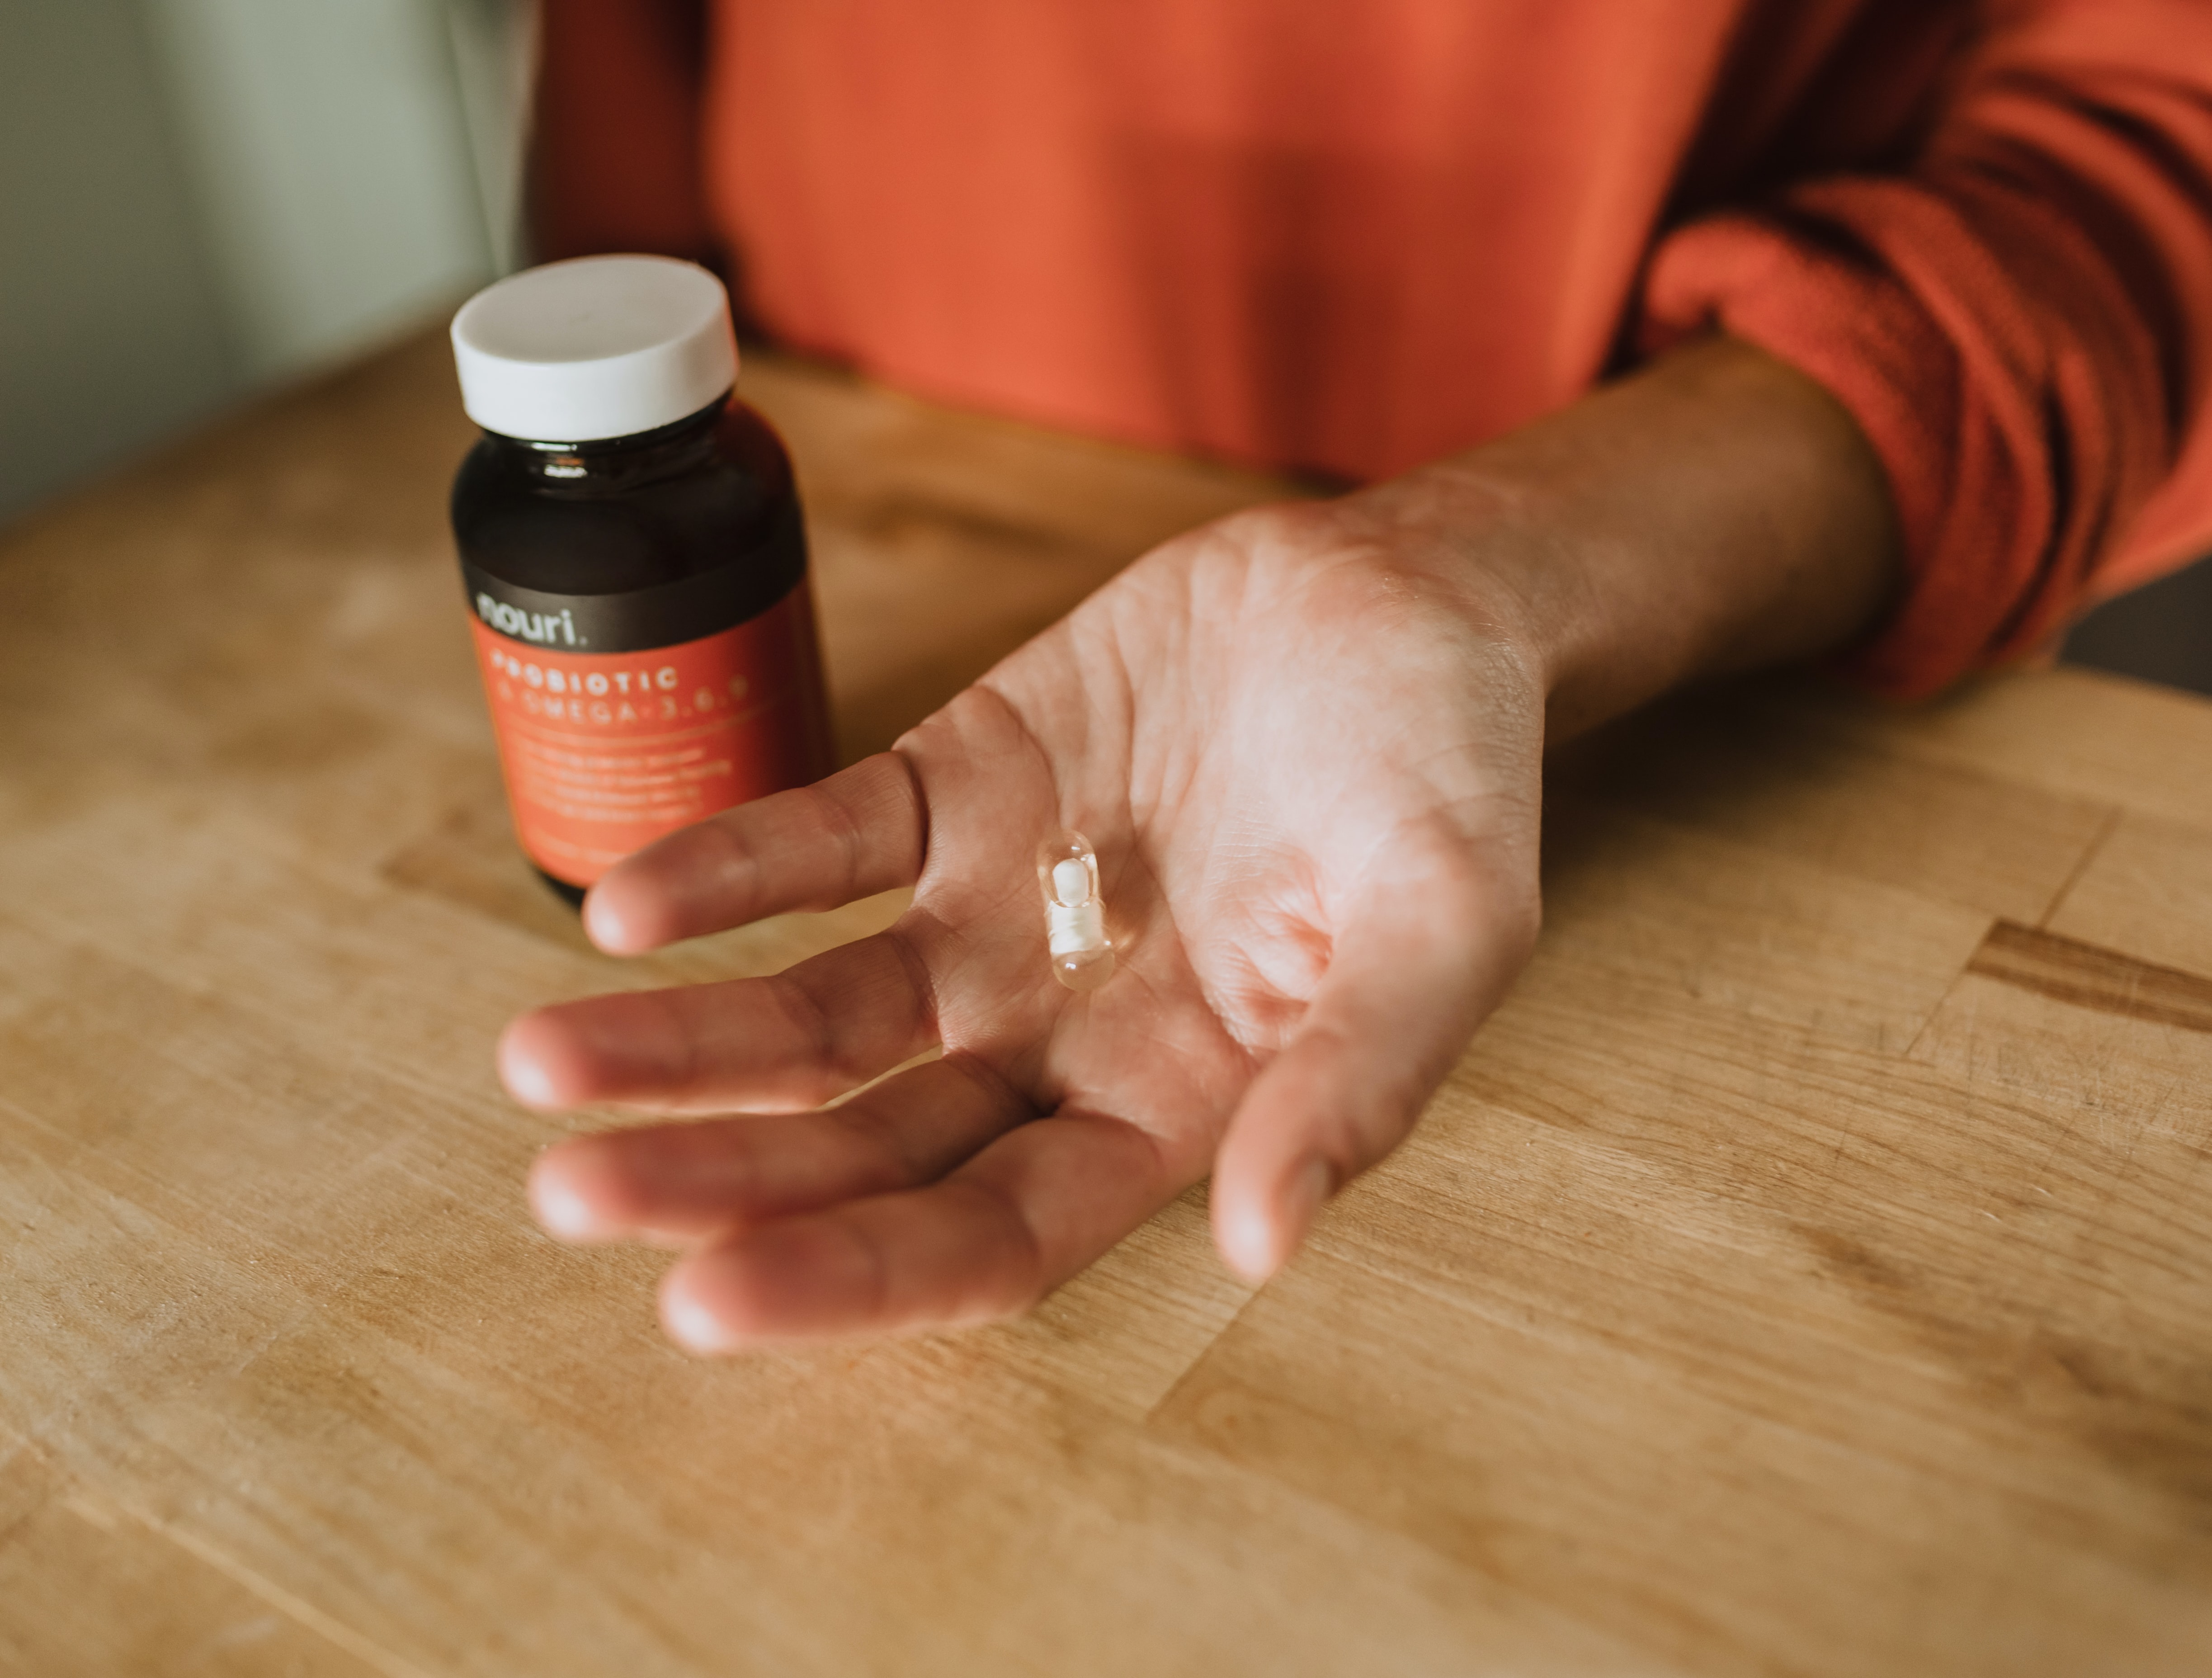 A person holds a multivitamin pill in their hand.